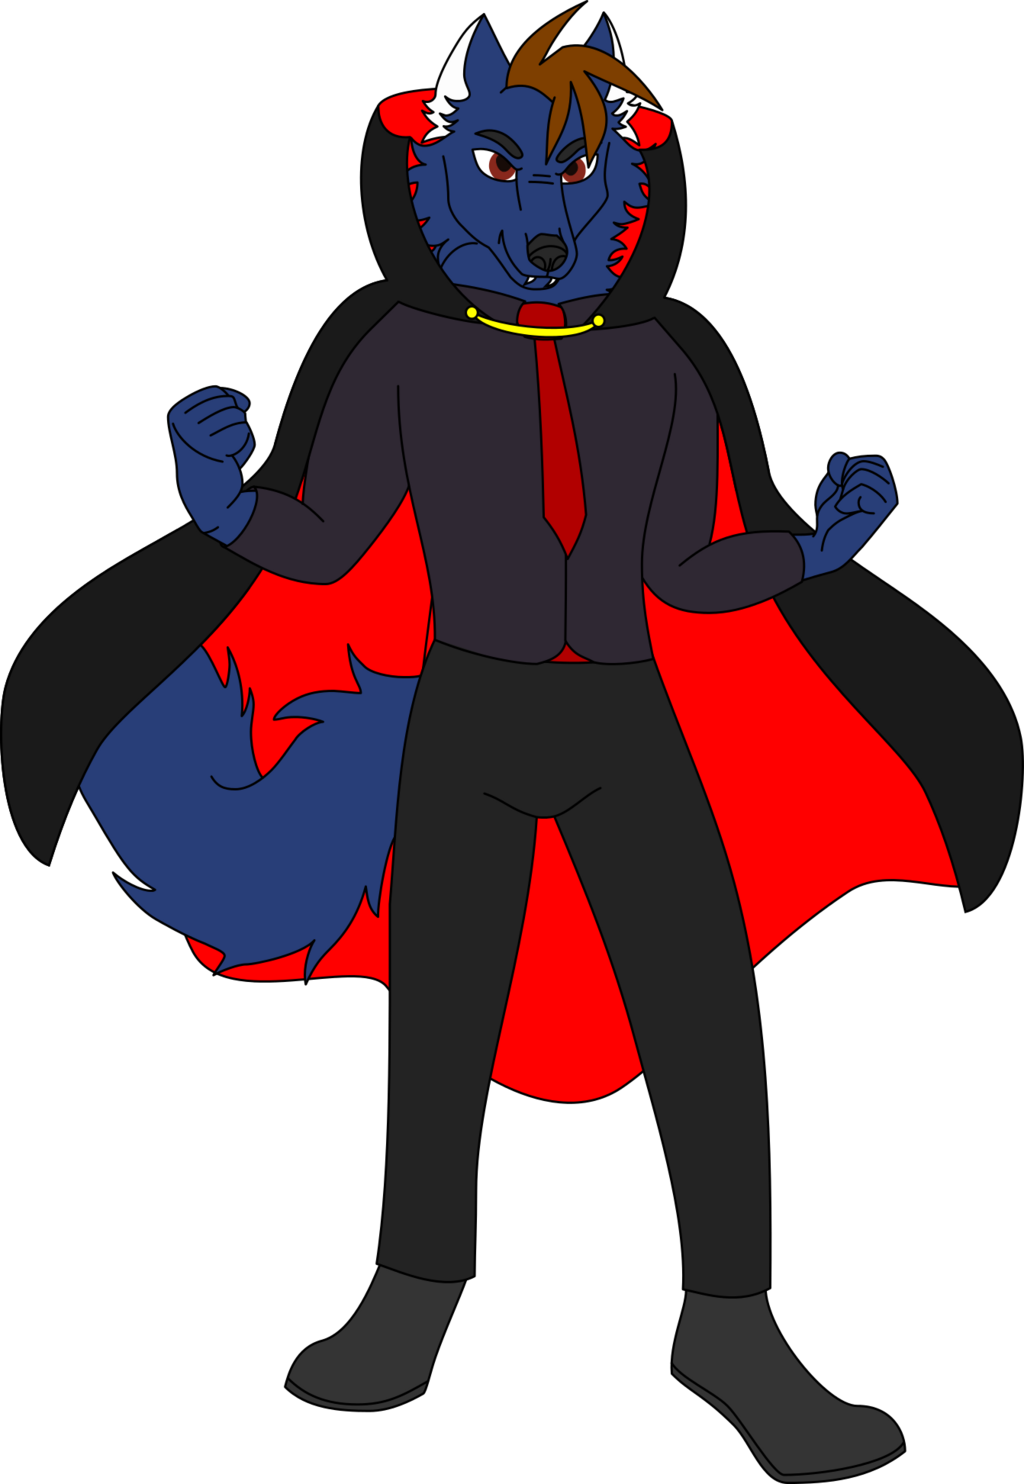 Most recent image: Count DJ the Vampire Wolf